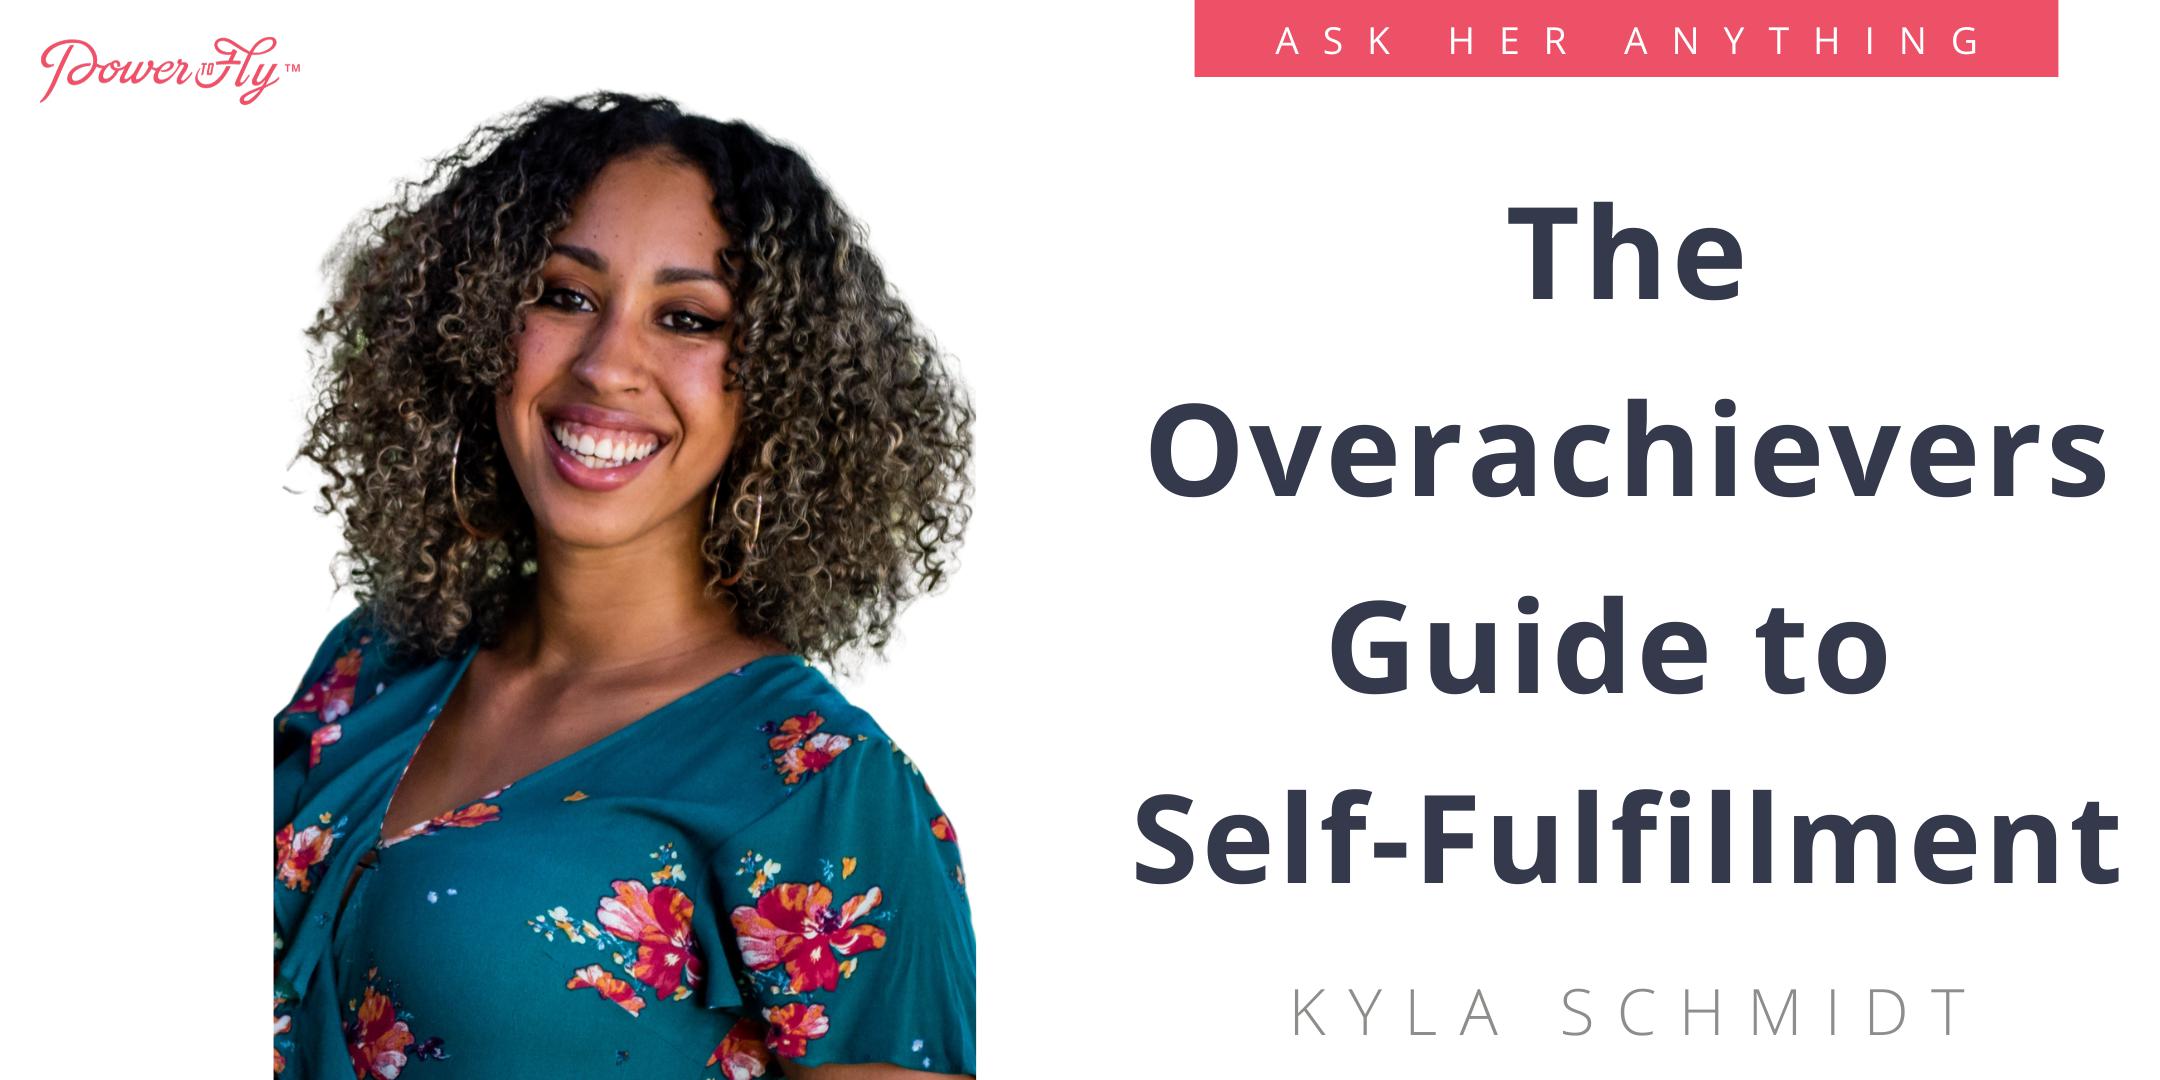 The Overachievers Guide to Self-Fulfillment